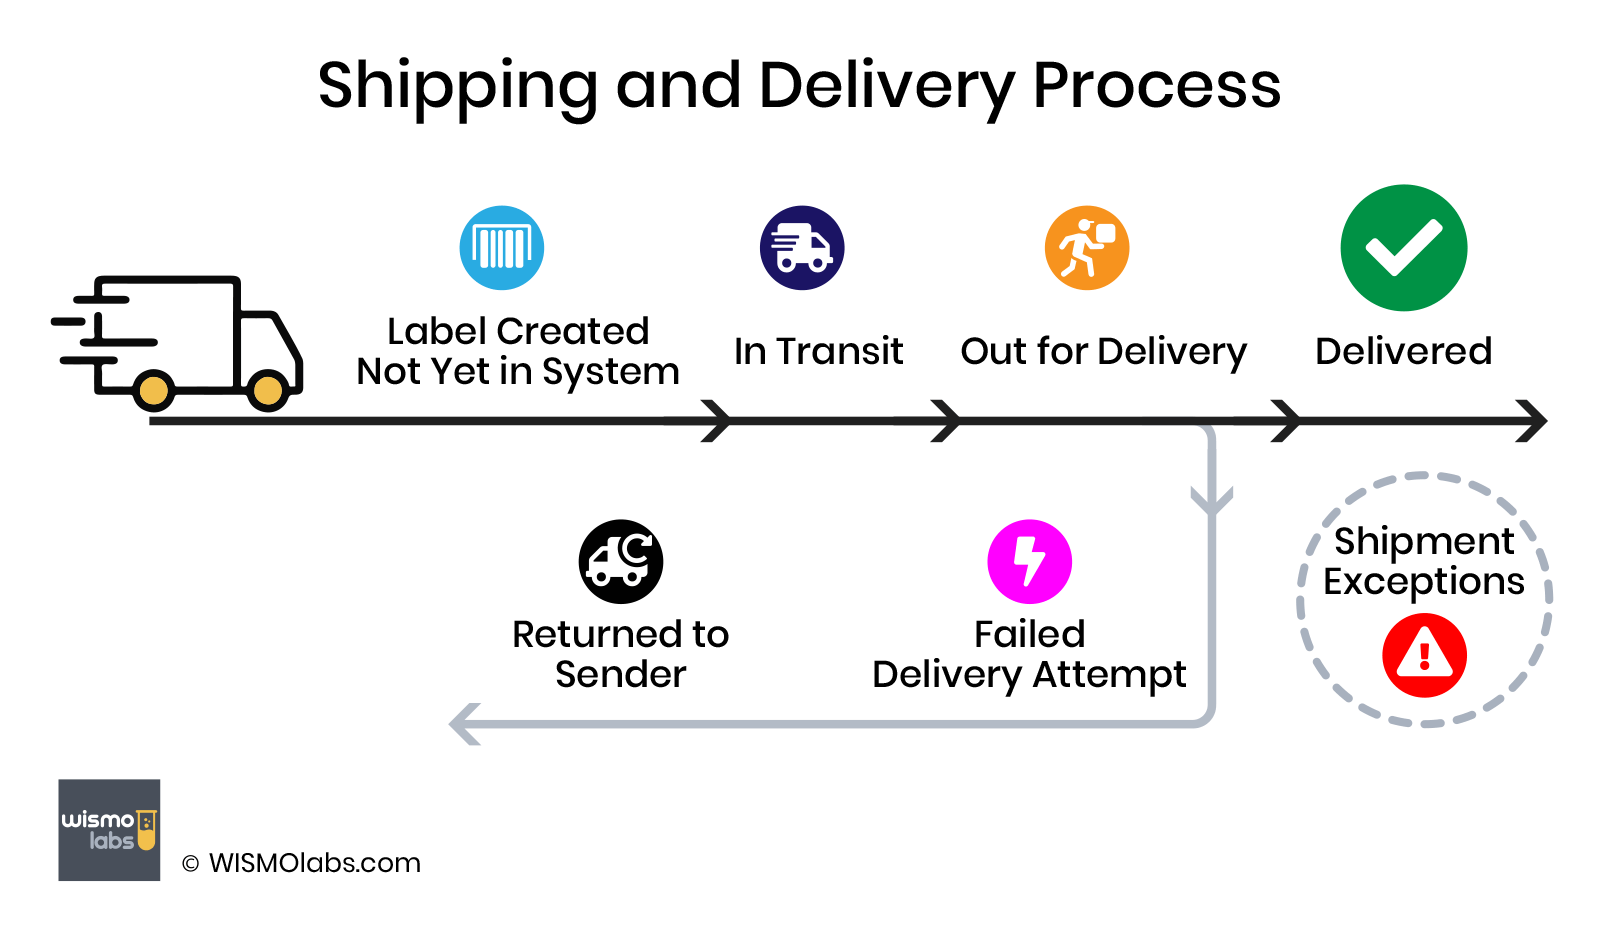 Shipping and delivery: Label created, In transit, Shipped, Out for Delivery, Delivered, Returned to Sender, Failed Delivery Attempt,Exceptions